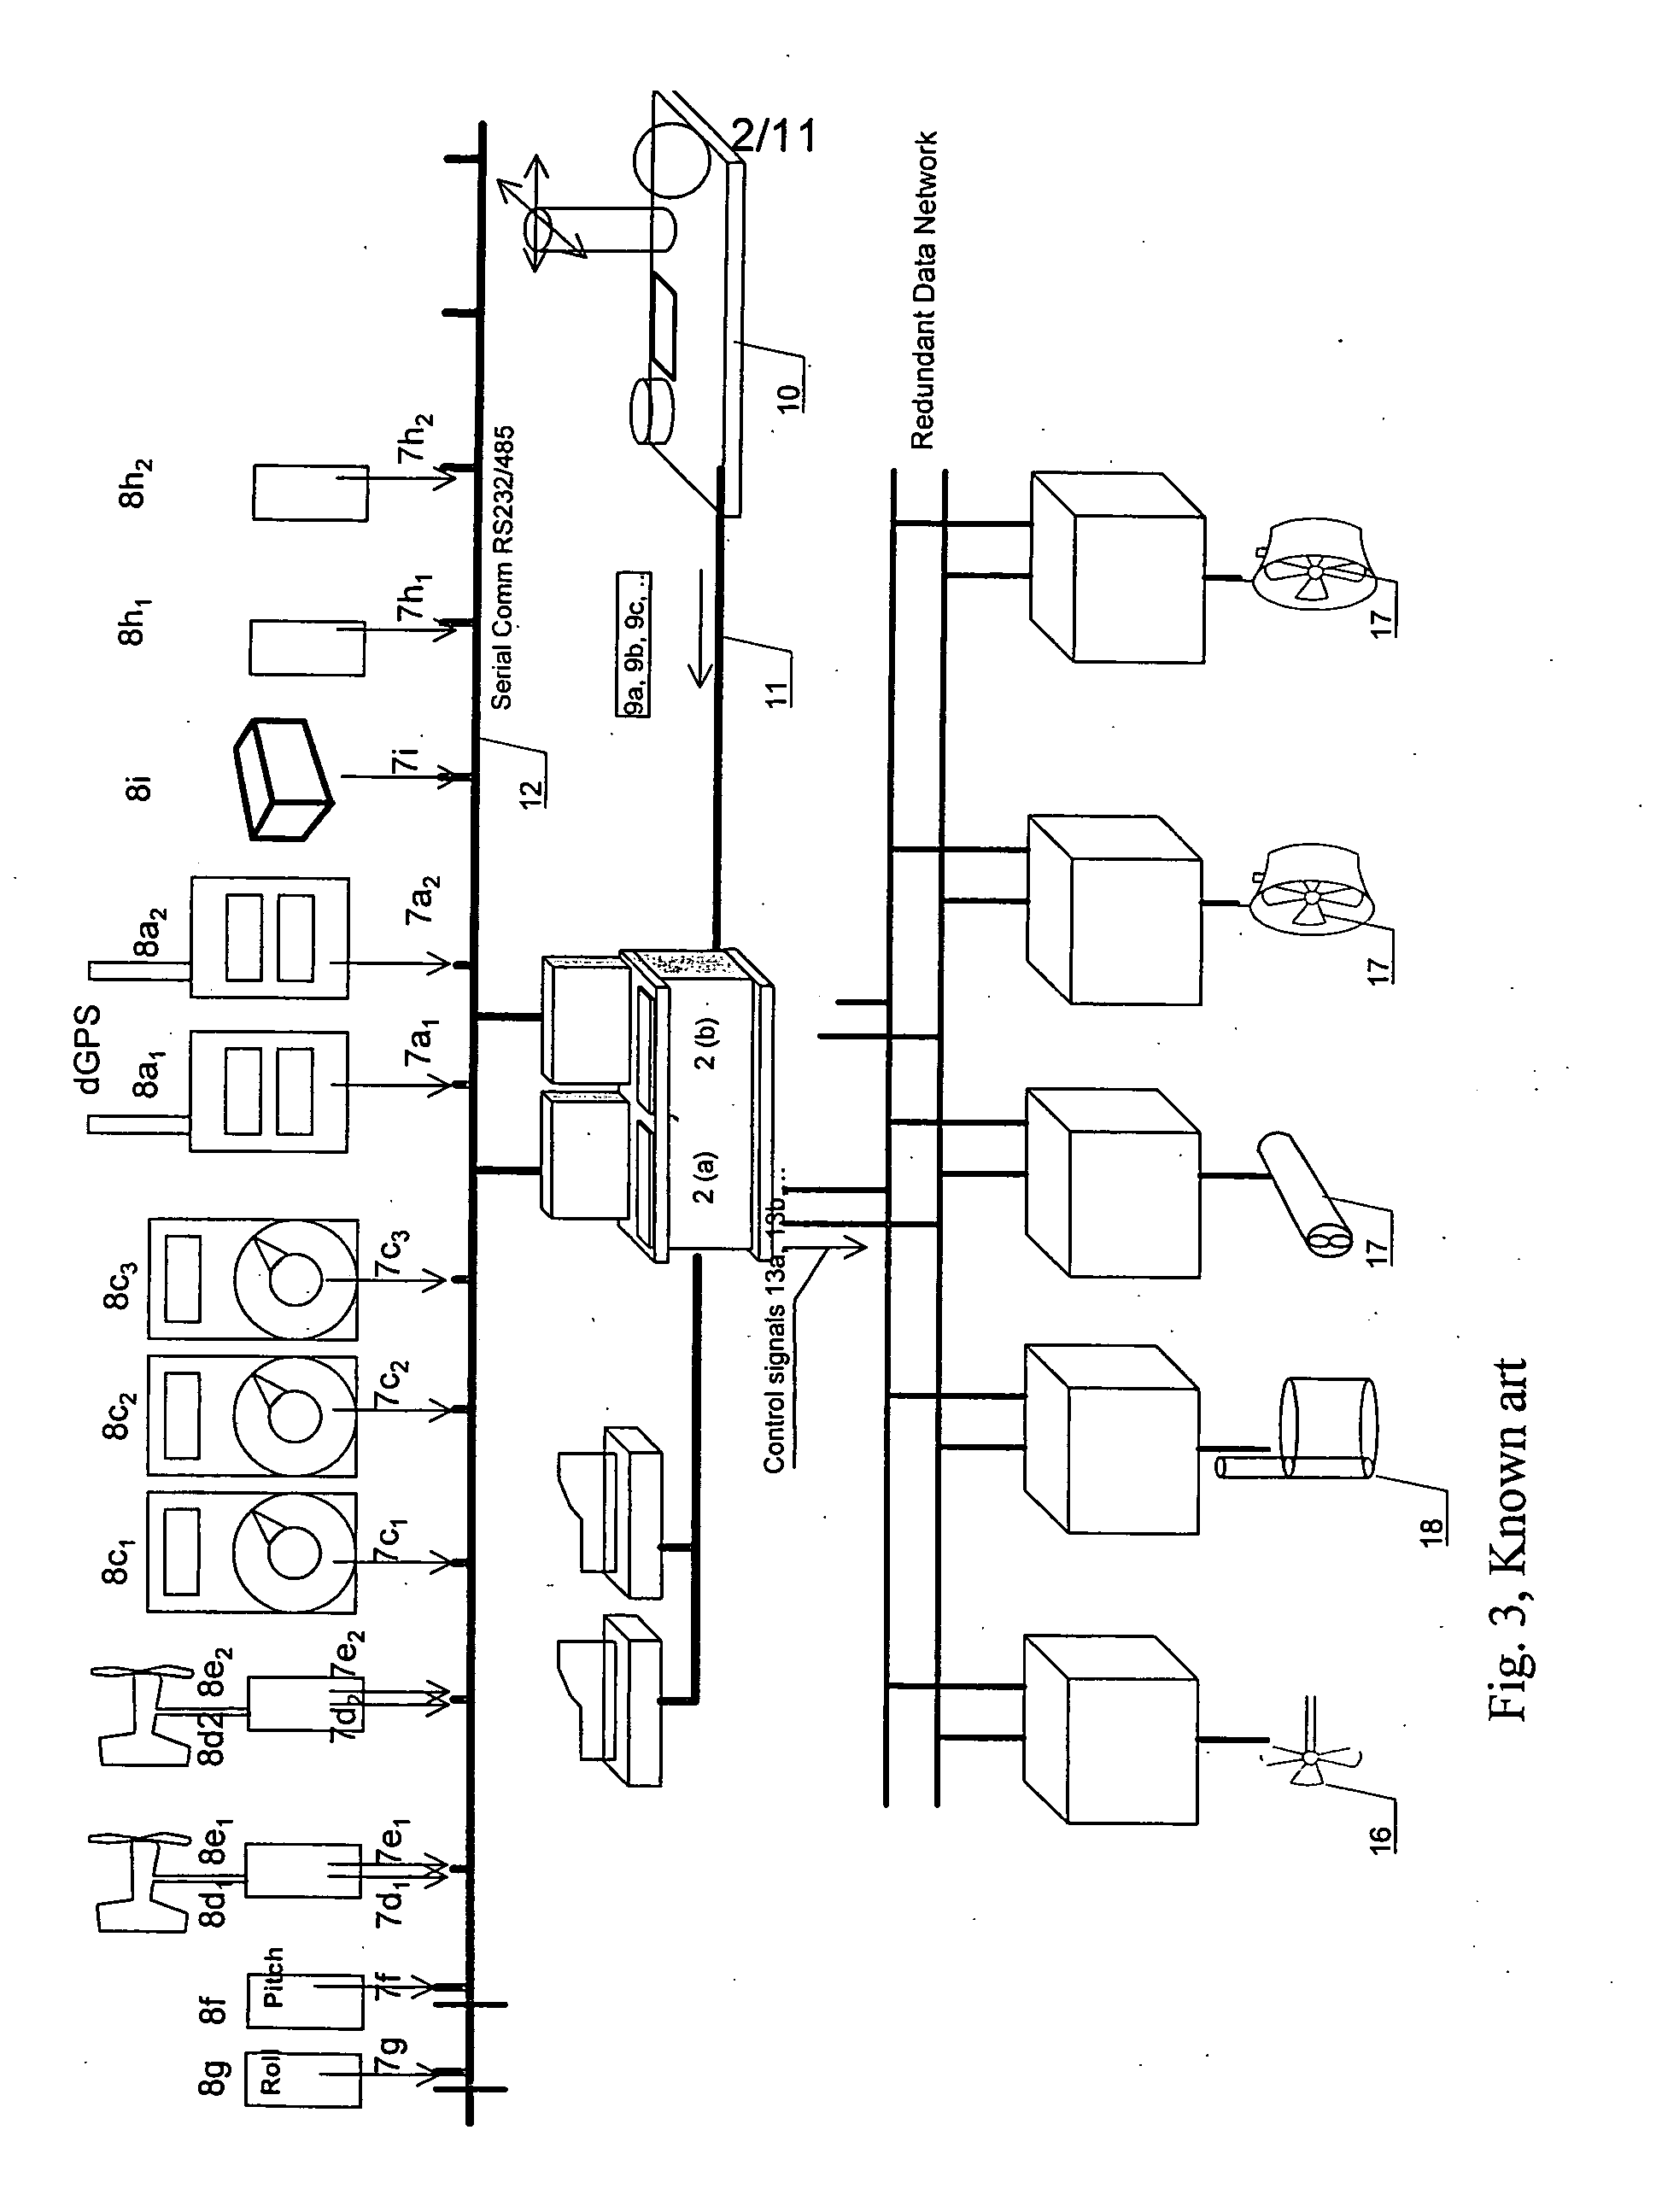 Method and system for testing a control system of a marine vessel